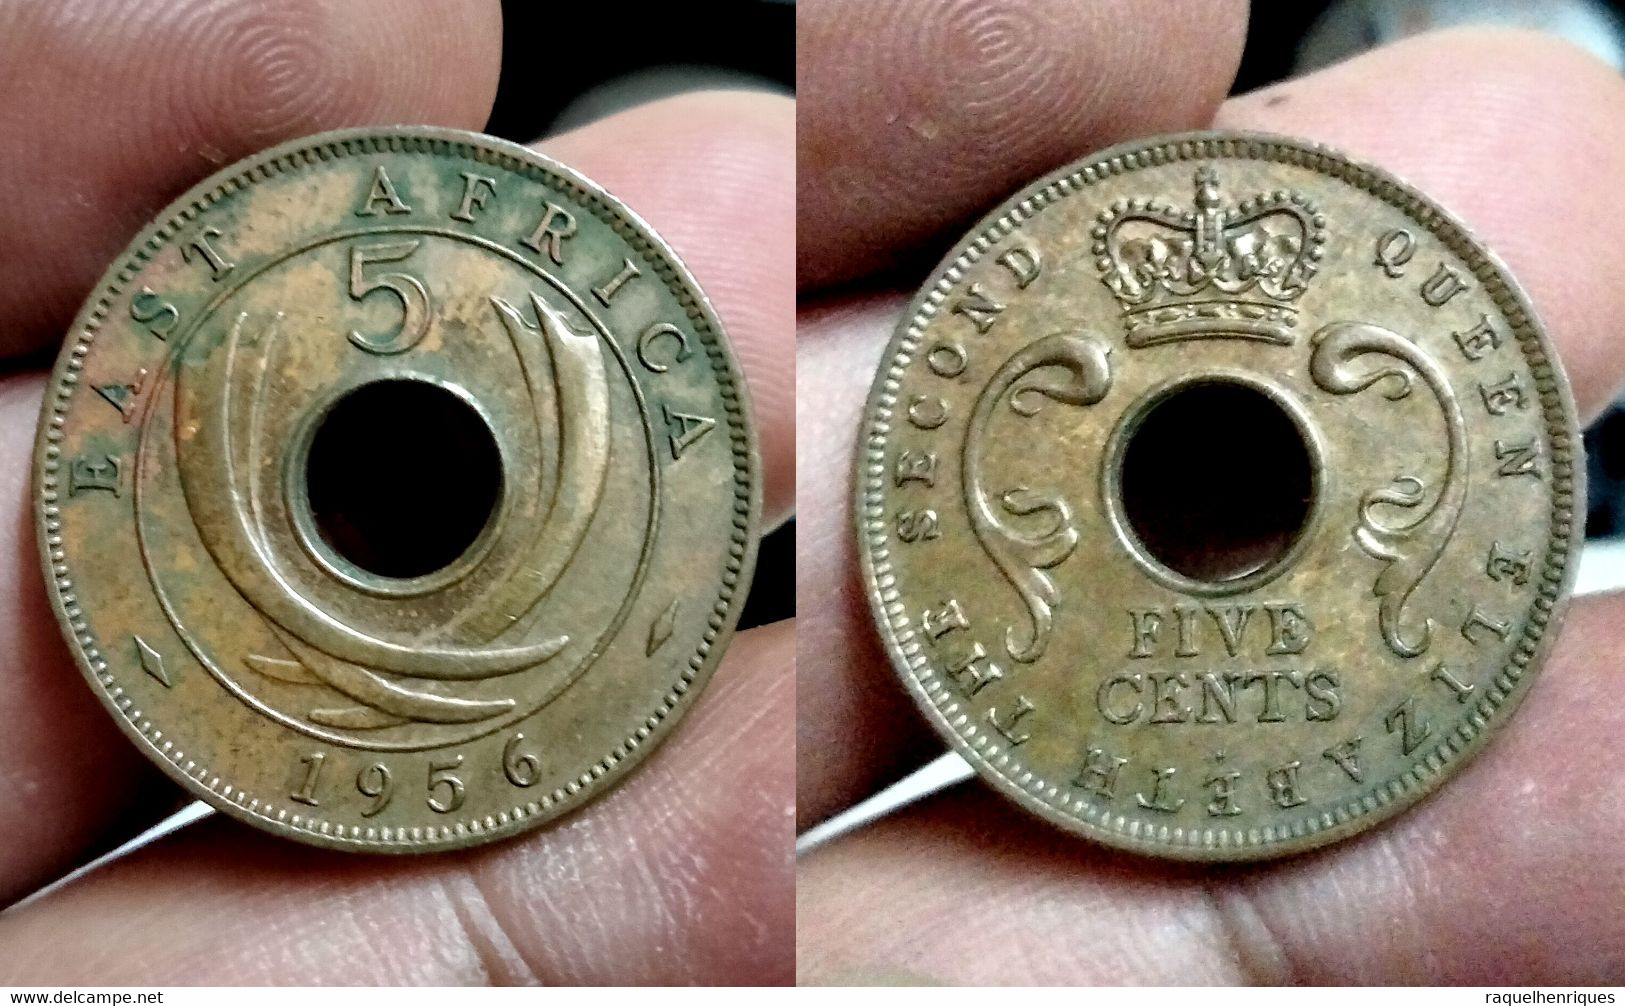 EAST AFRICA 5 CENTS 1956 Km#37 (CX#01-938) - British Colony